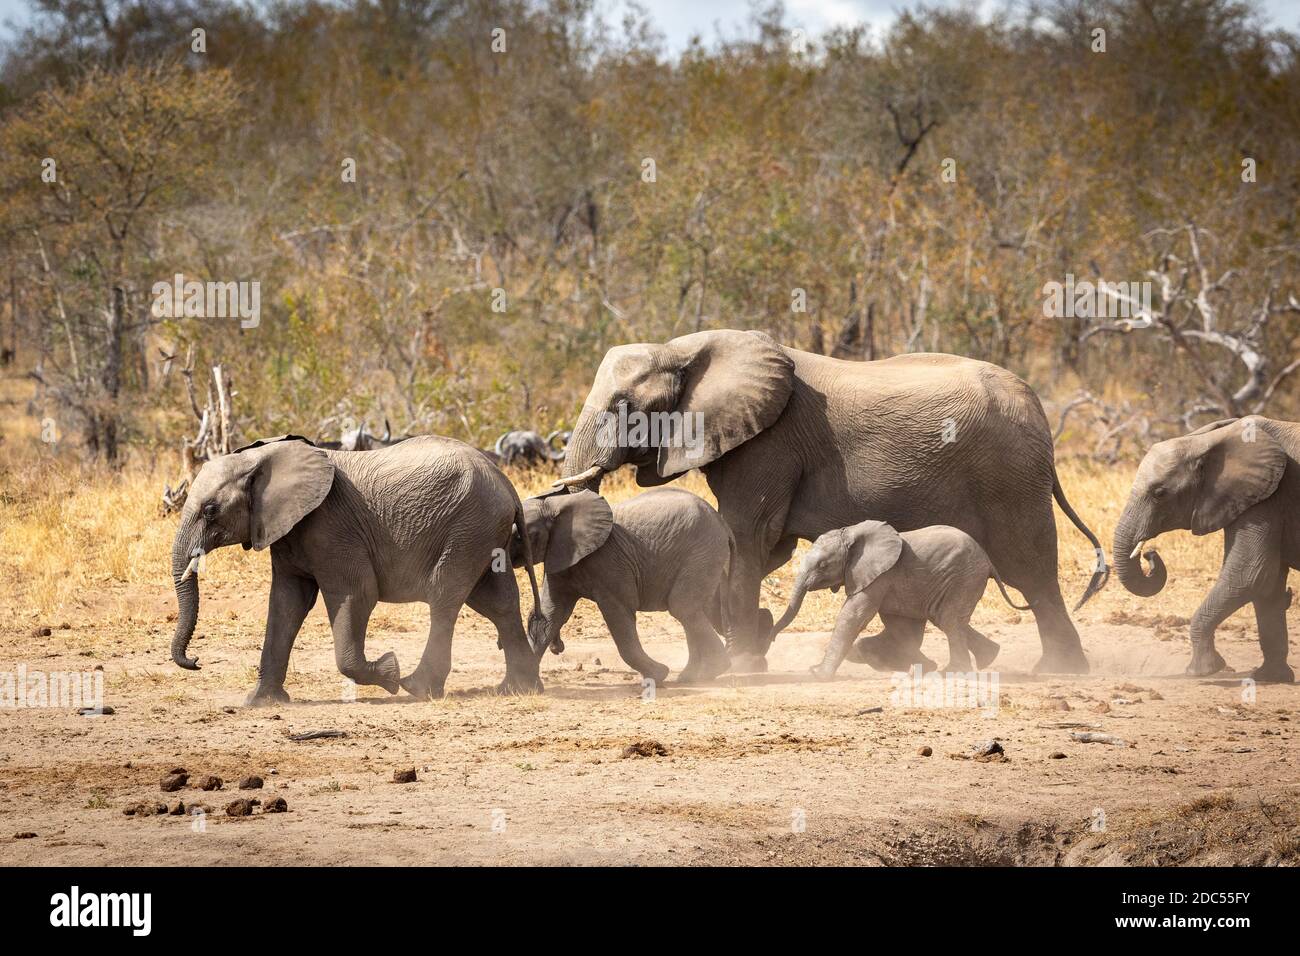 Small elephant family walking together with buffalo in the background in Kruger Park in South Africa Stock Photo